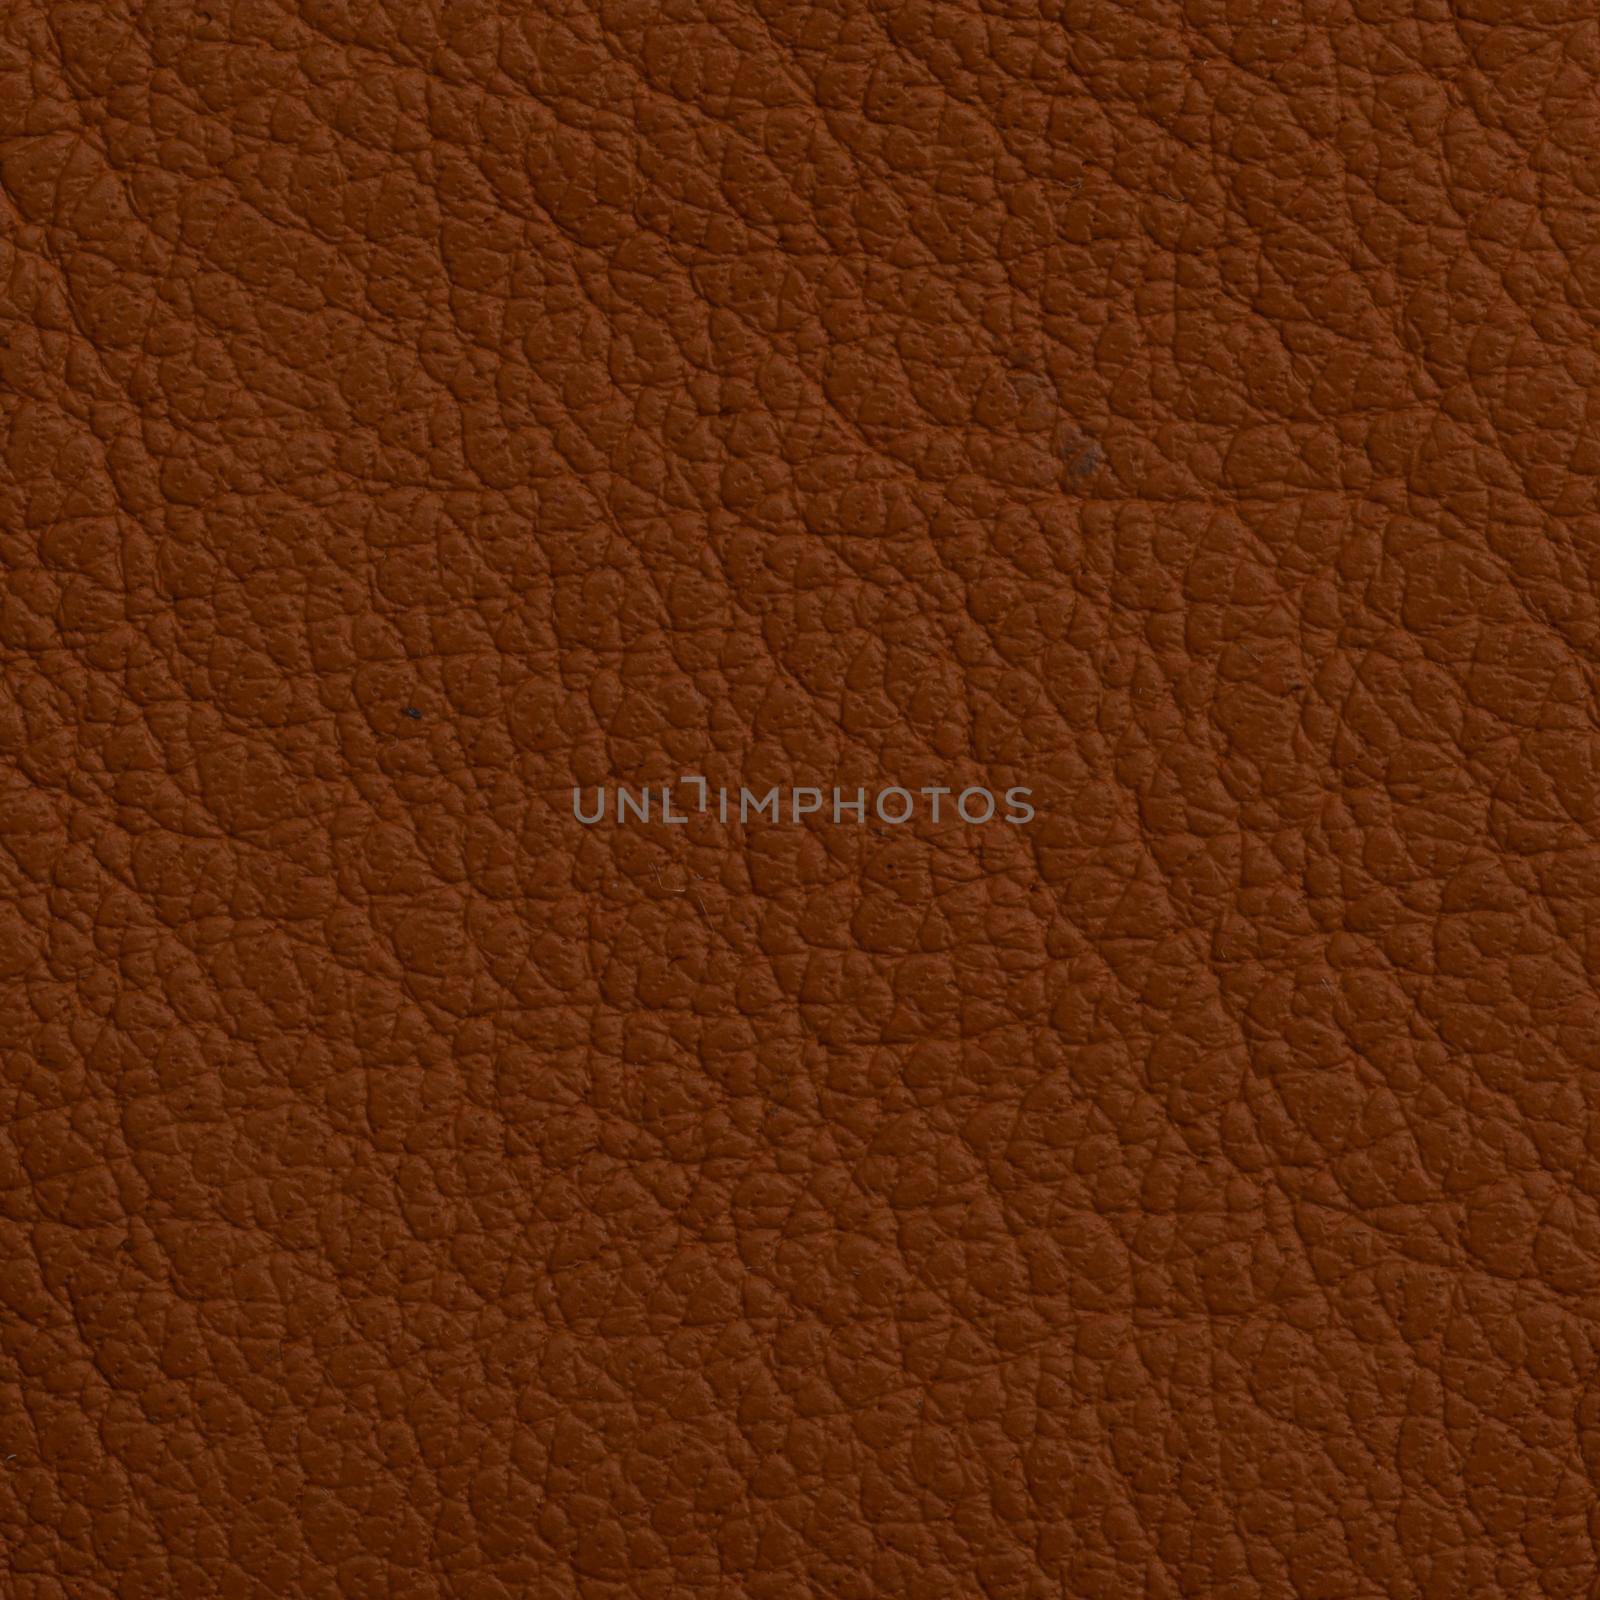 Red Leather texture for background by nikitabuida